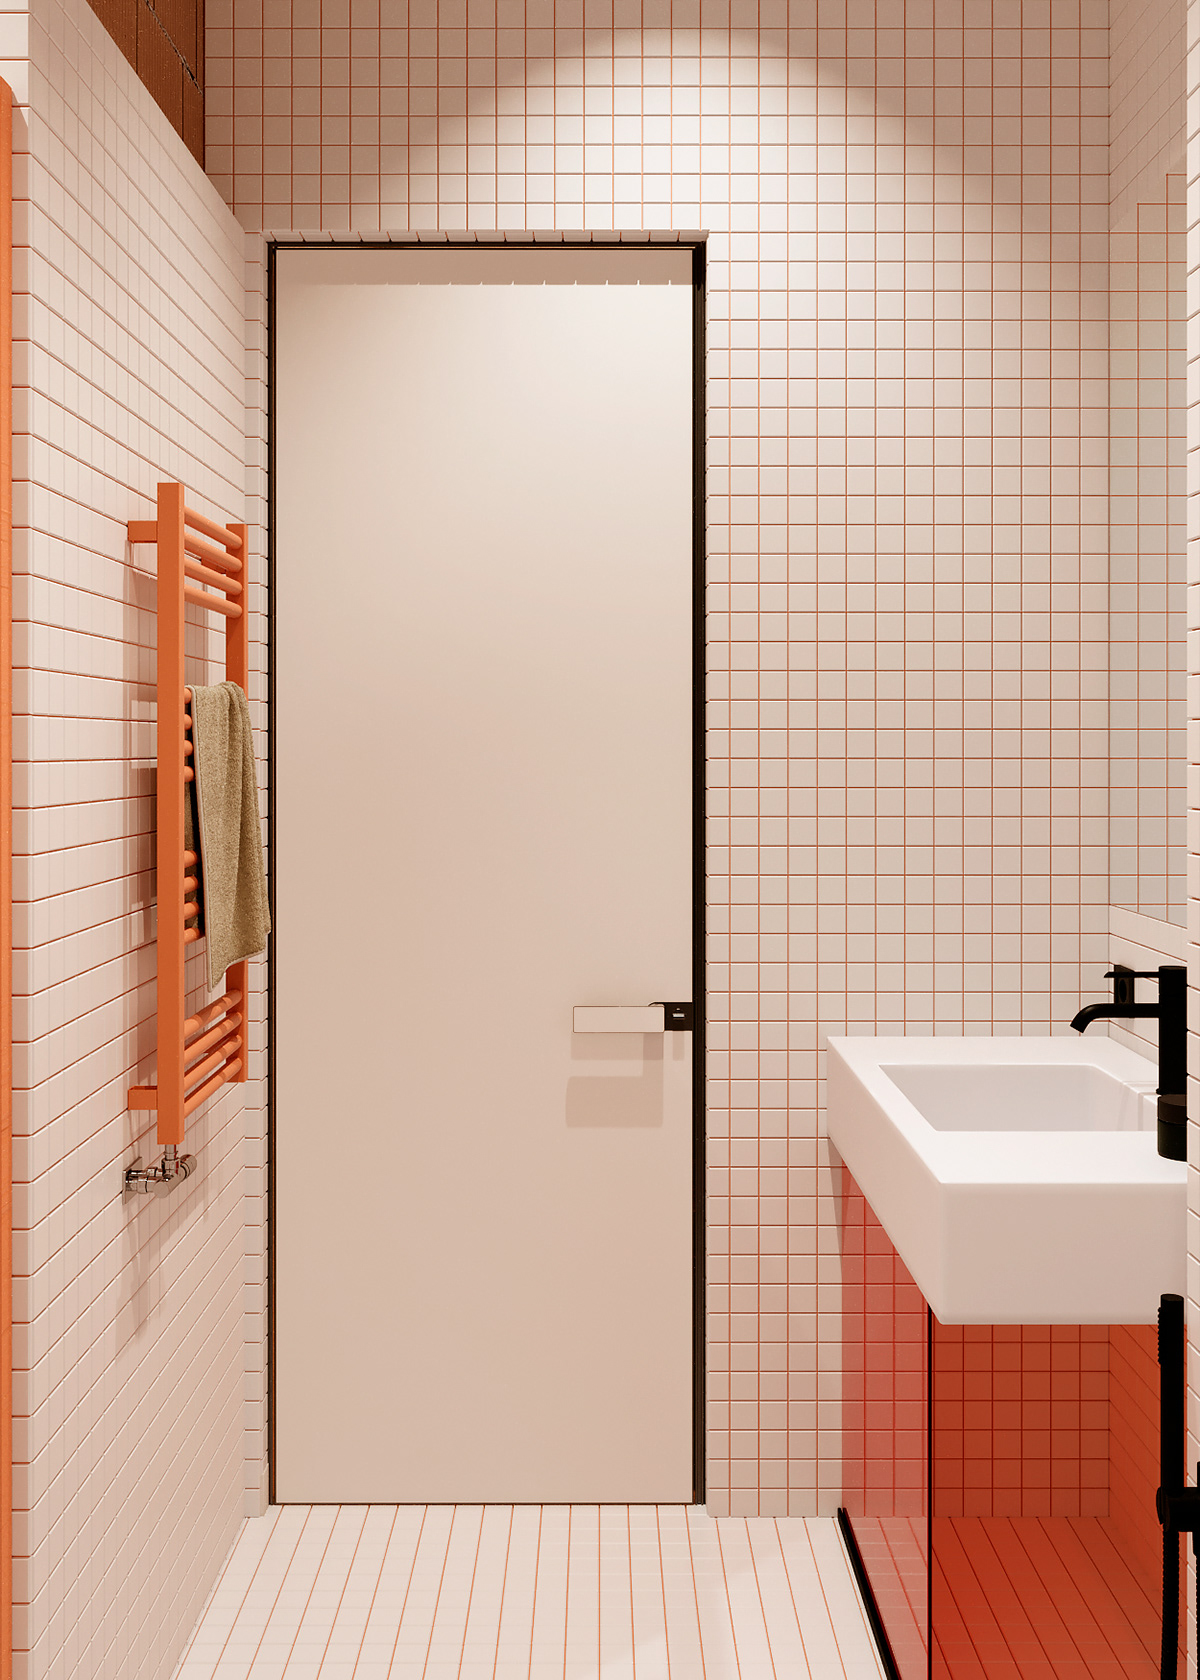 The bathroom is compact and fully equipped, with a color scheme that complements the decorated items.